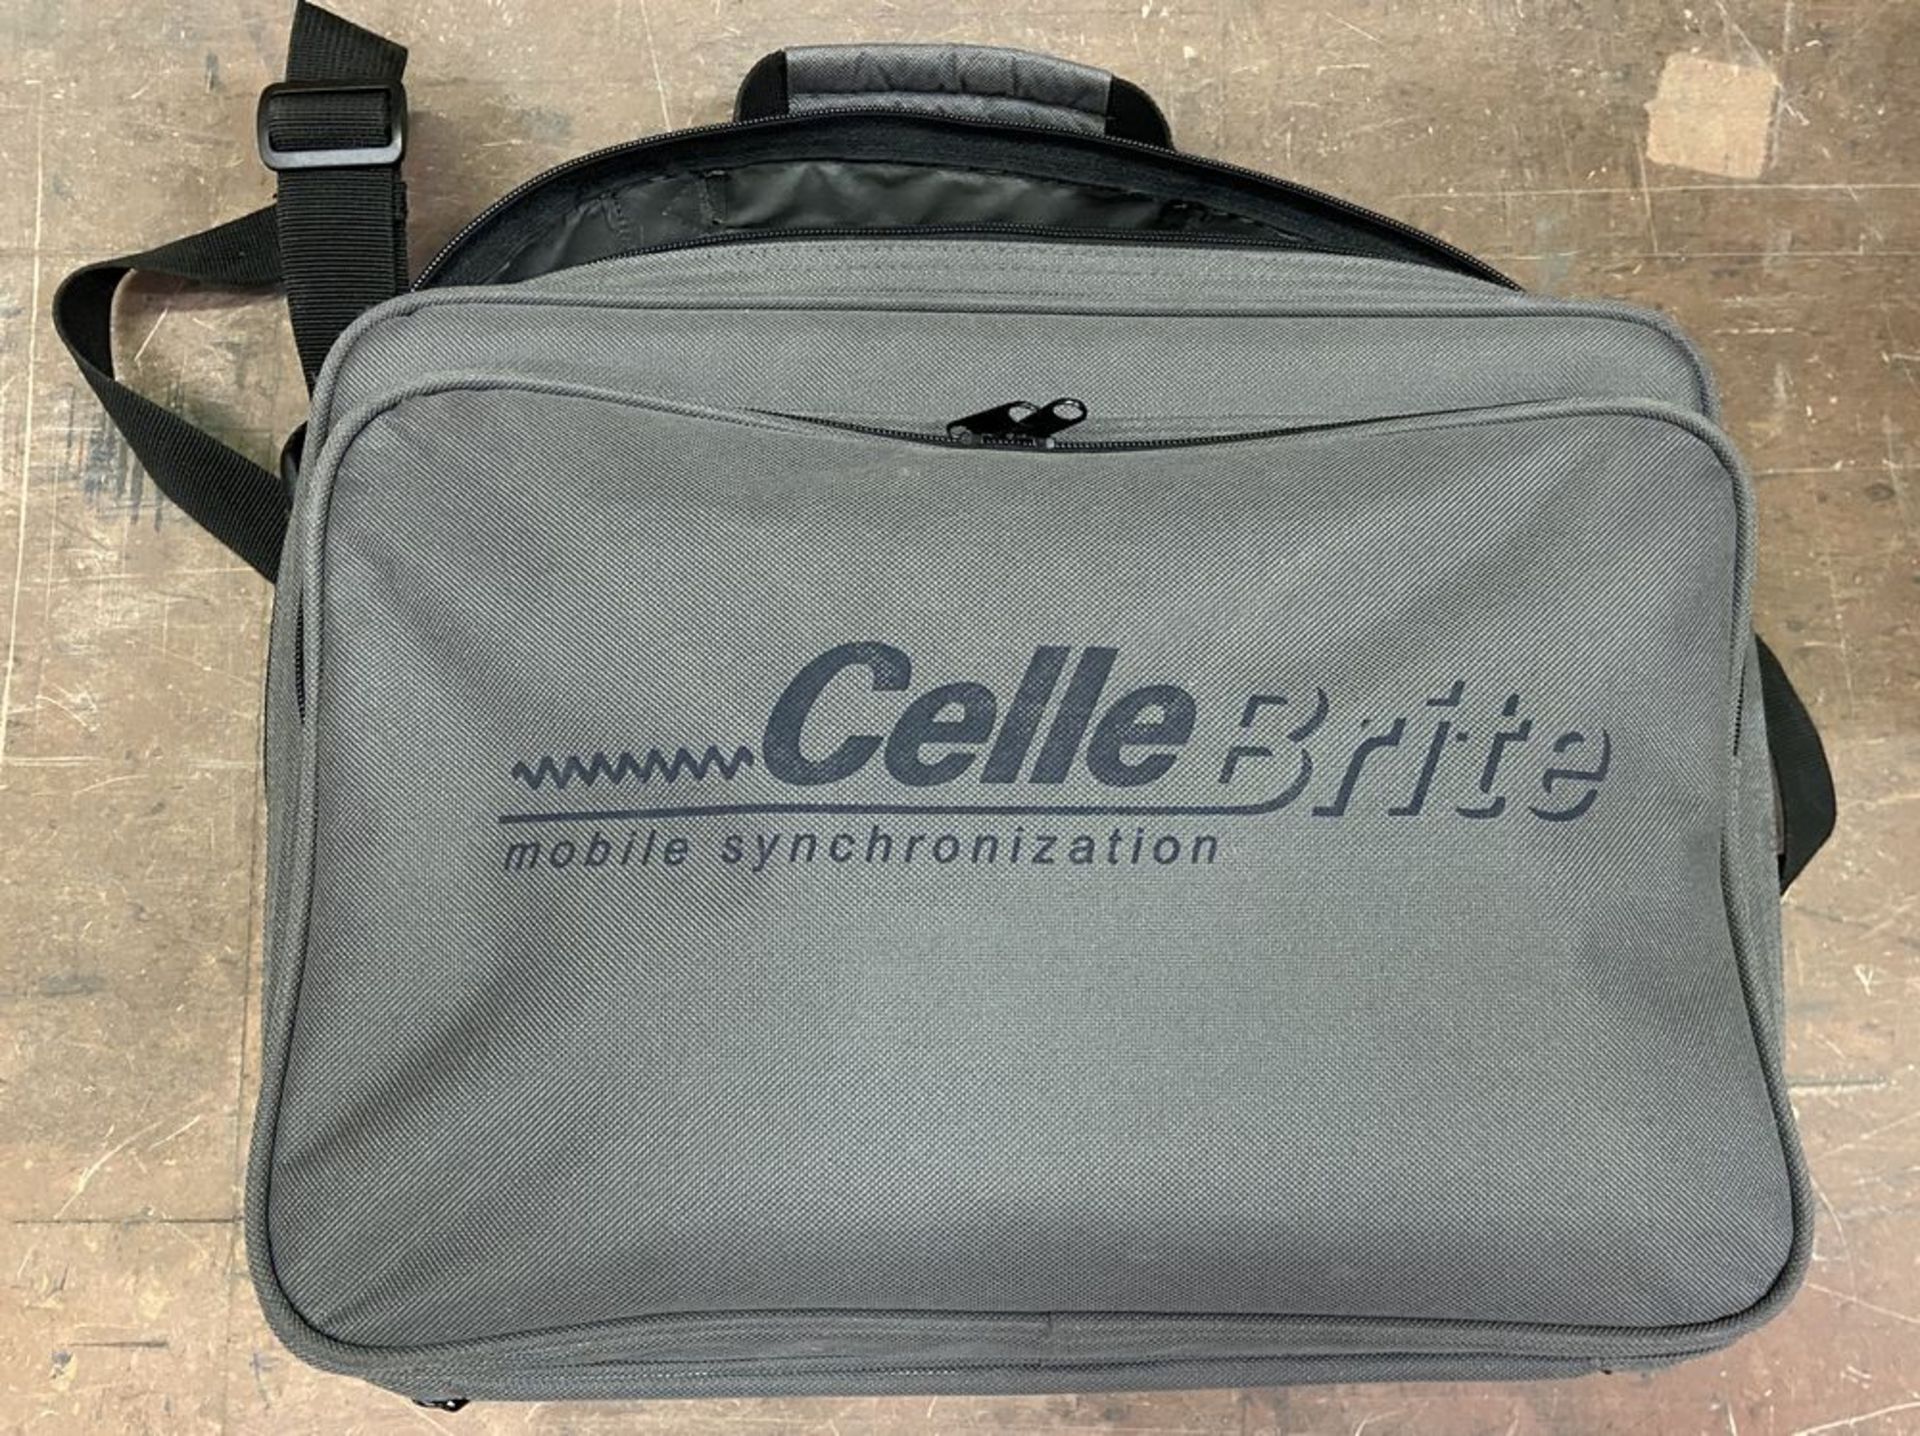 Celle Brite Mobile Synchronization Case and Device UME24